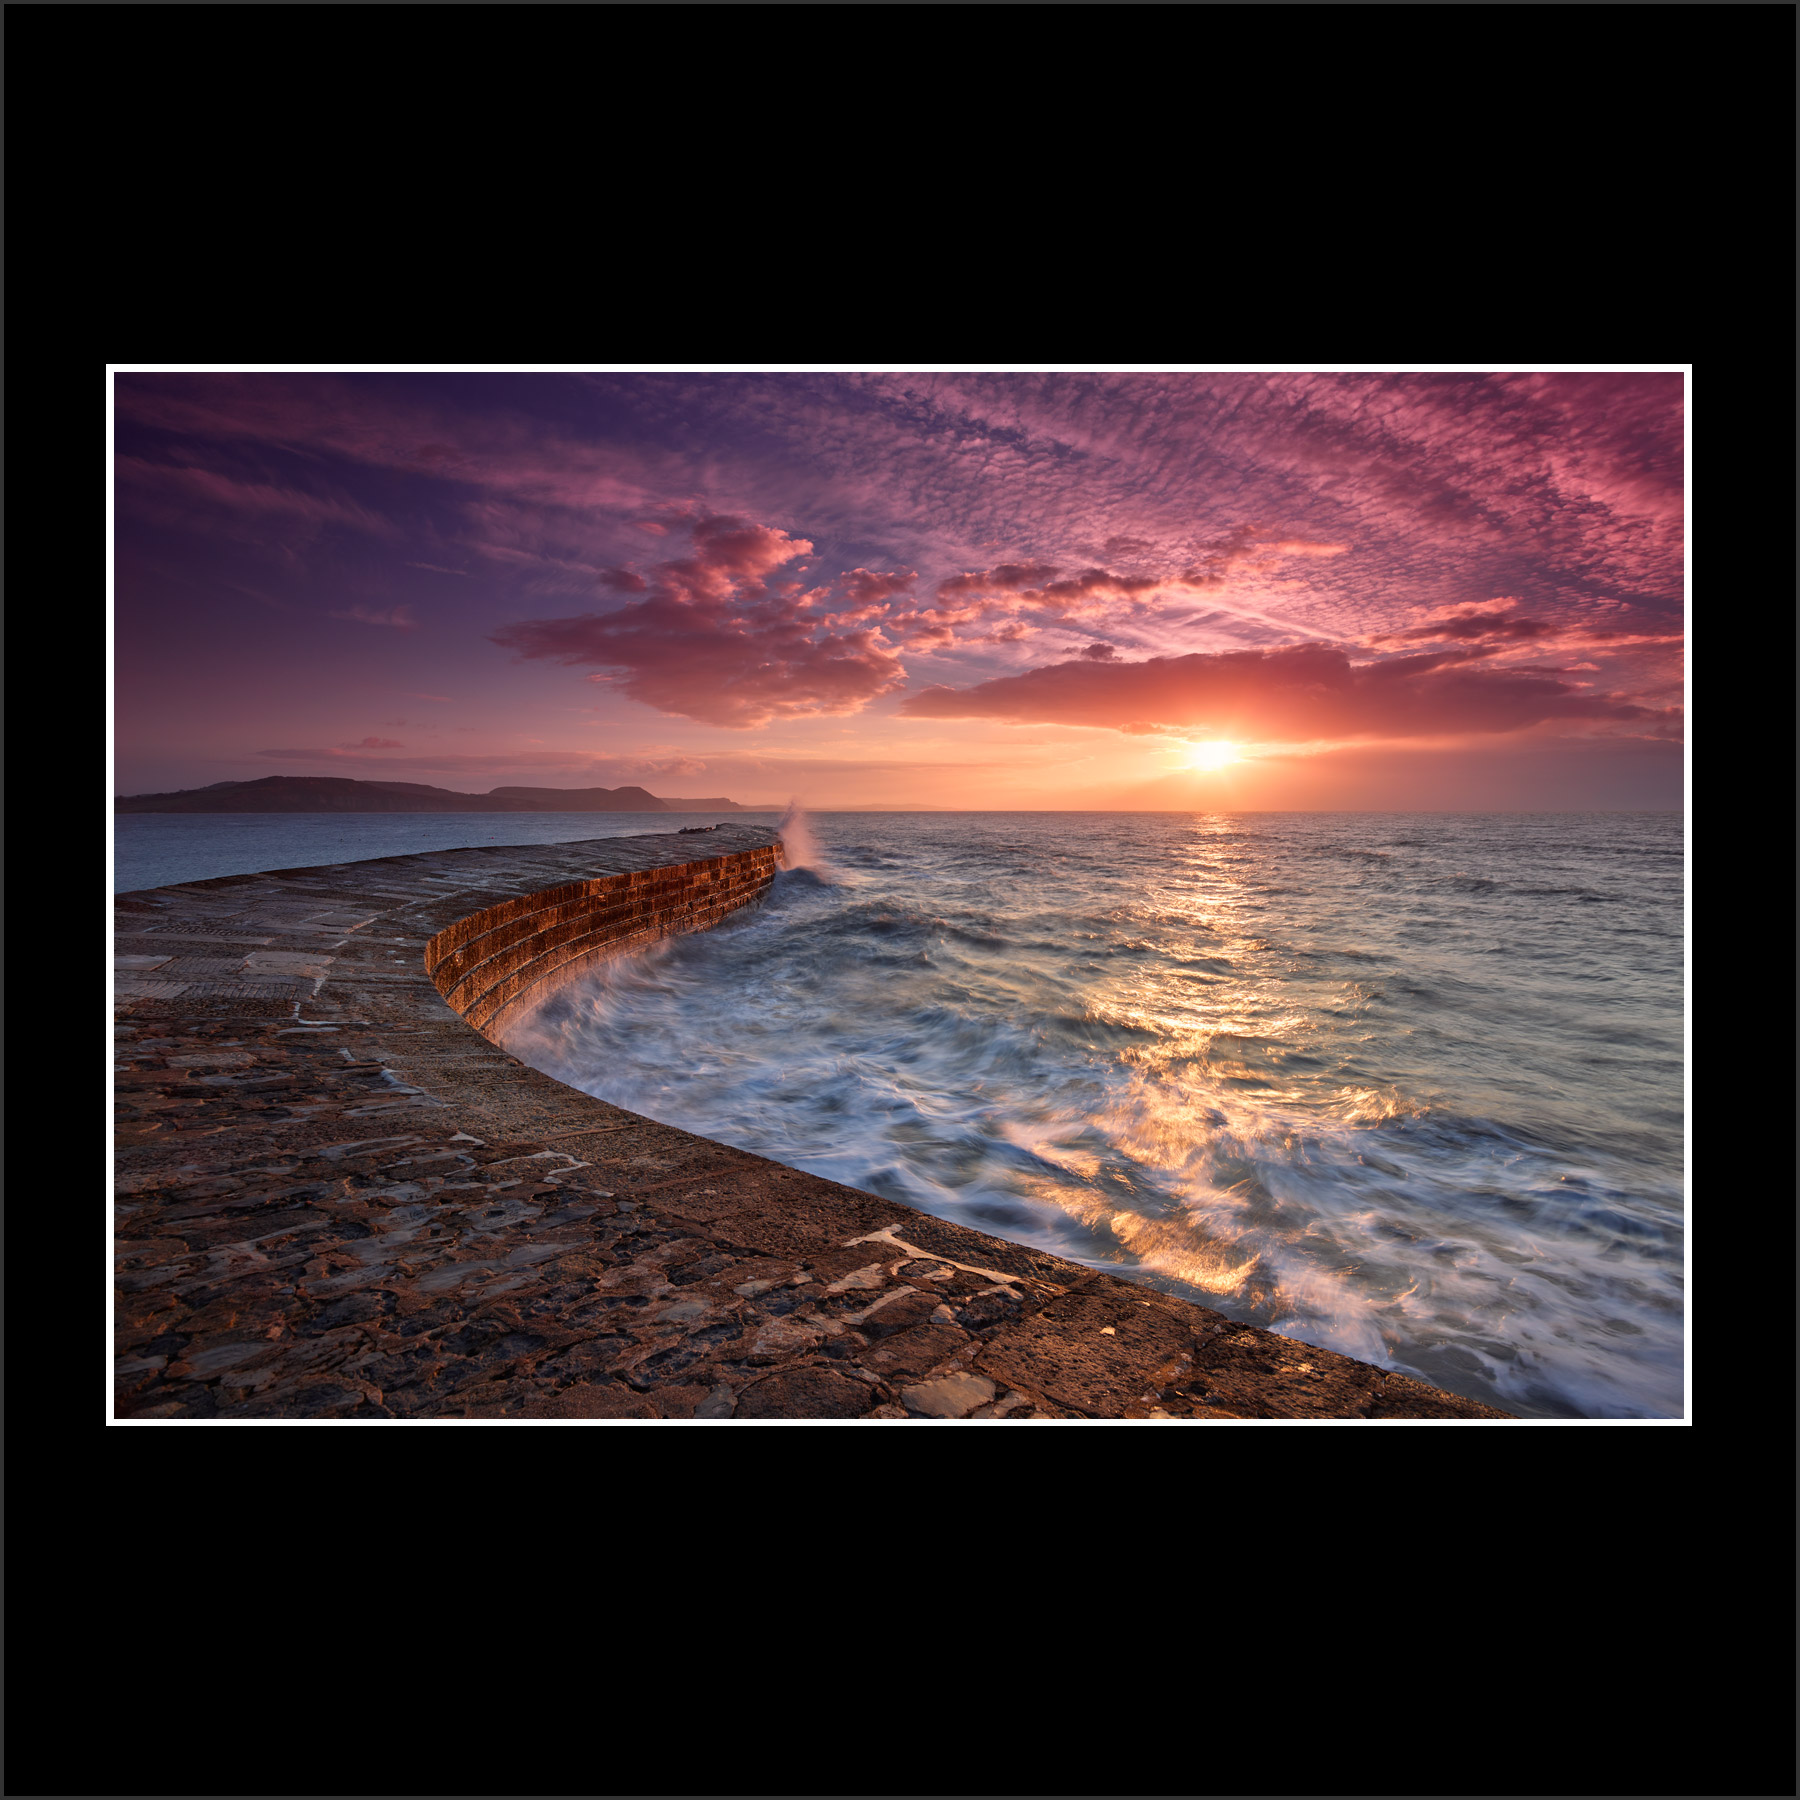 breakwater - buy the limited edition print online